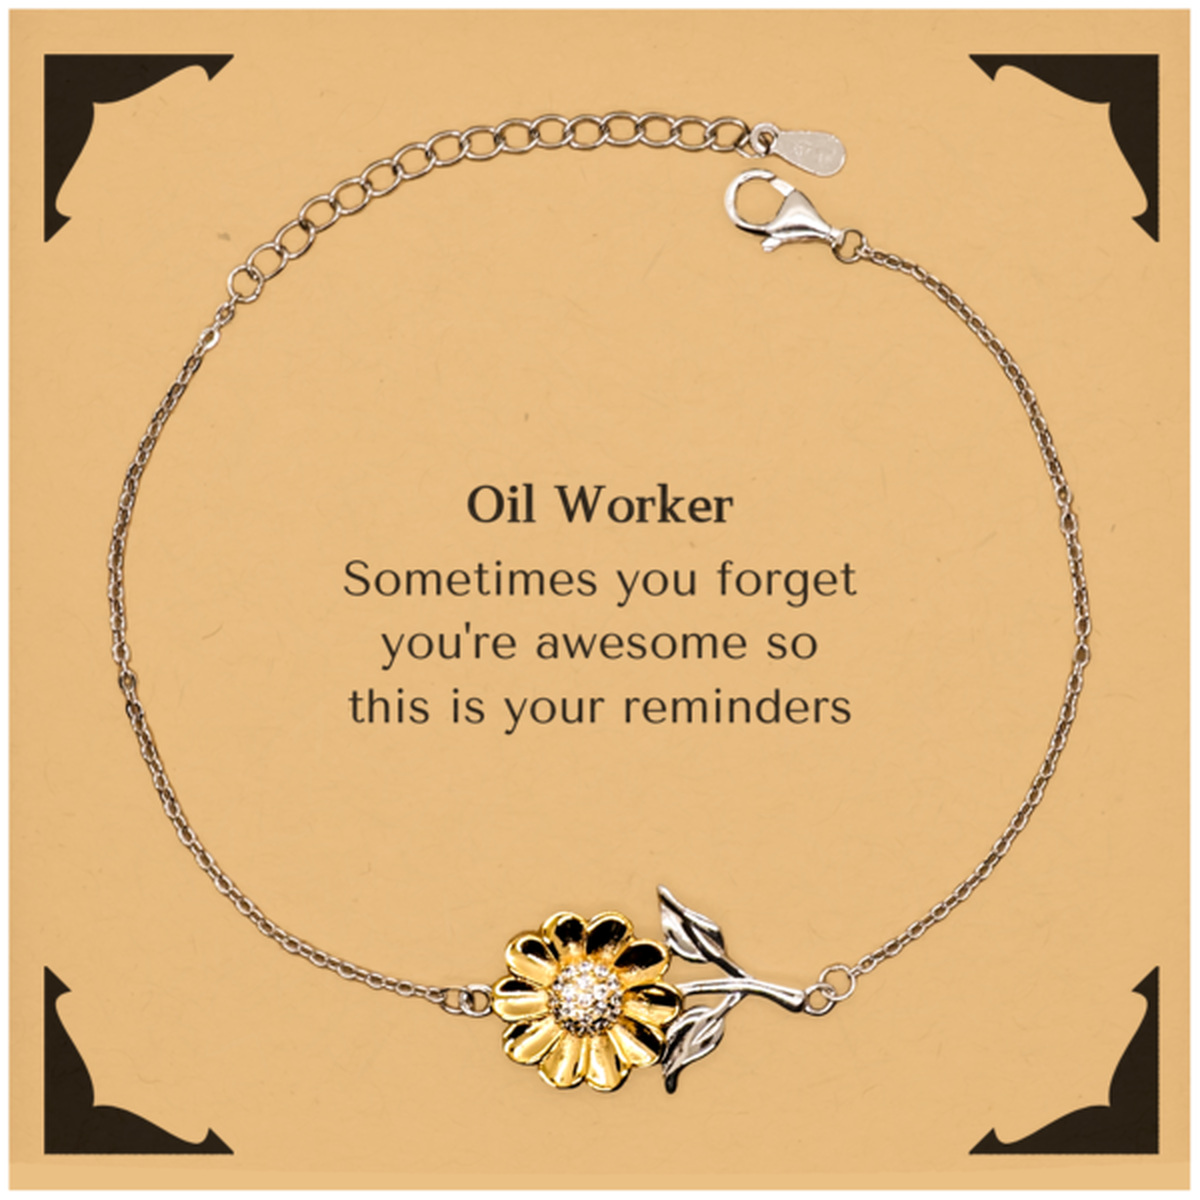 Sentimental Oil Worker Sunflower Bracelet, Oil Worker Sometimes you forget you're awesome so this is your reminders, Graduation Christmas Birthday Gifts for Oil Worker, Men, Women, Coworkers